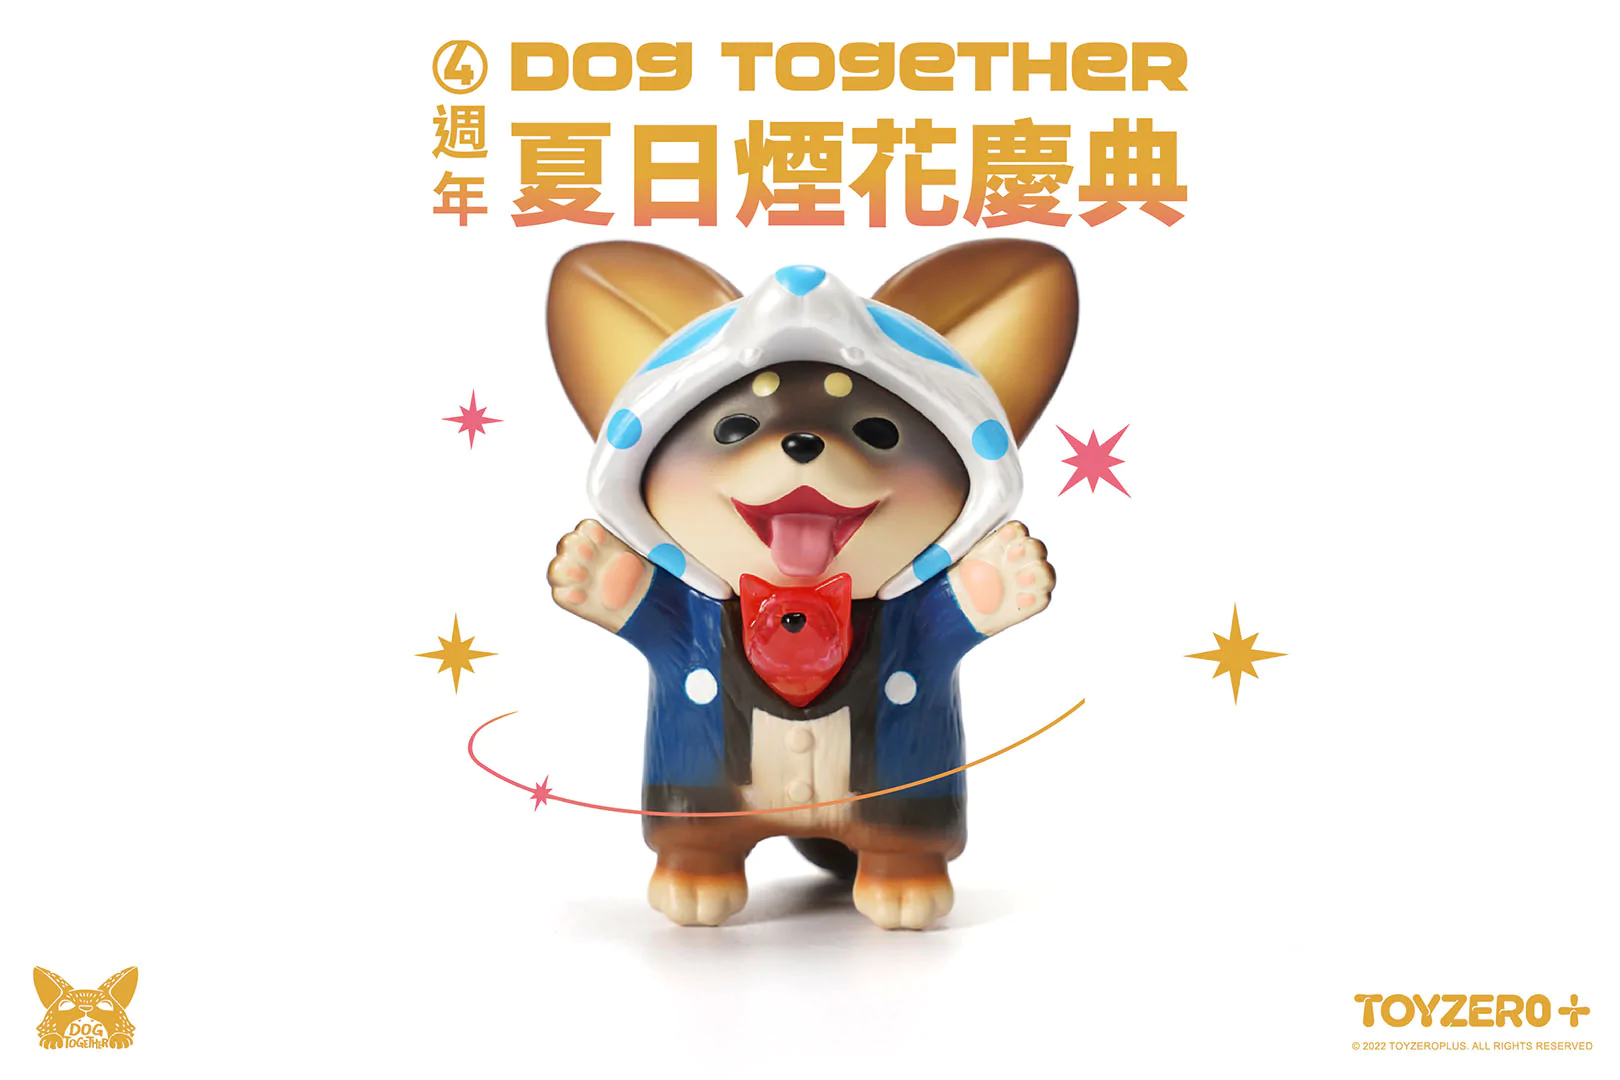 5th Anniversary Baby Dou Dou x Baby Fiffy by Dog Together - myplasticheart